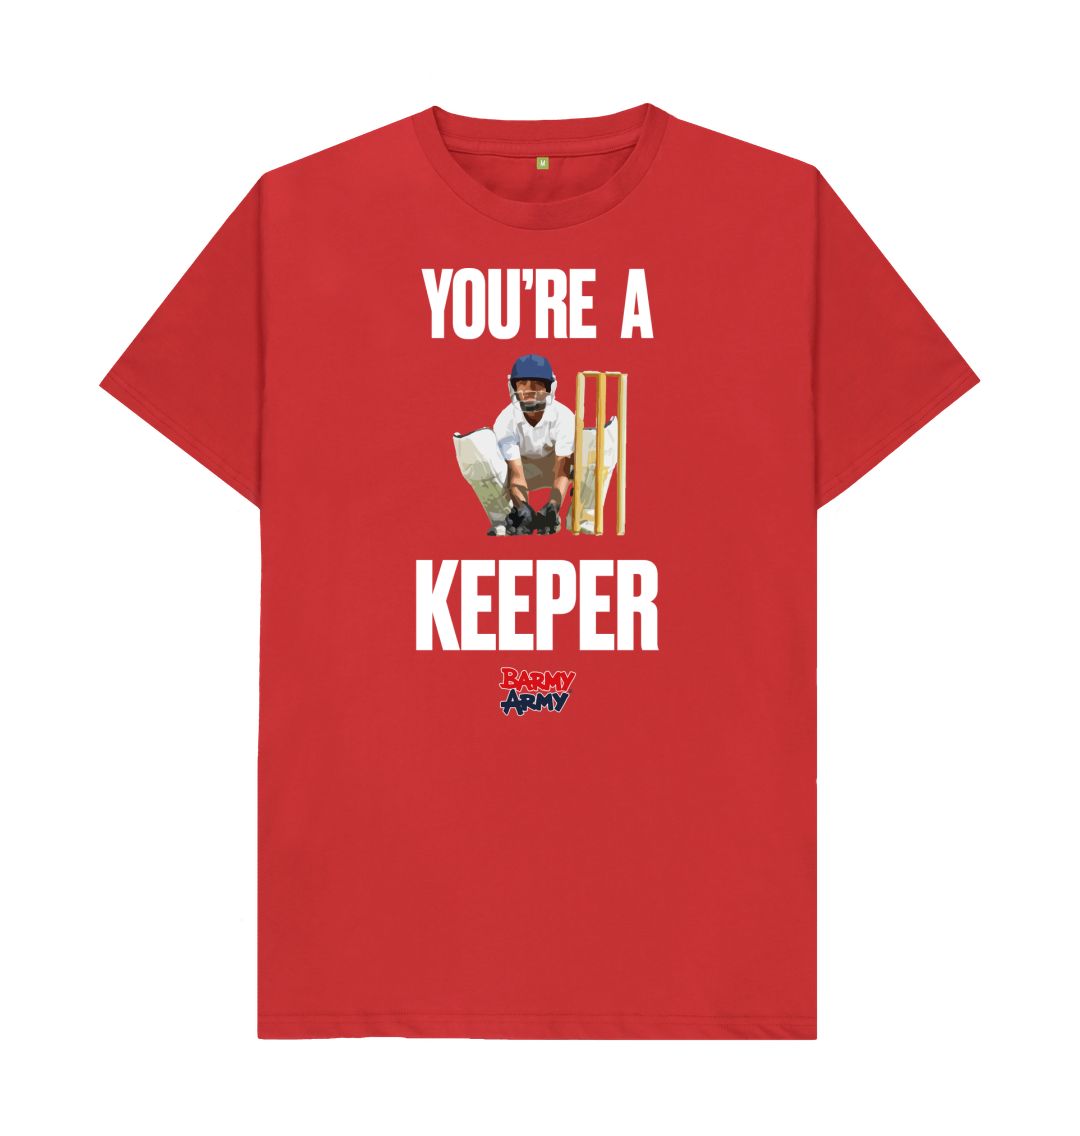 Red Barmy Army Keeper Slogan Tee - Men's